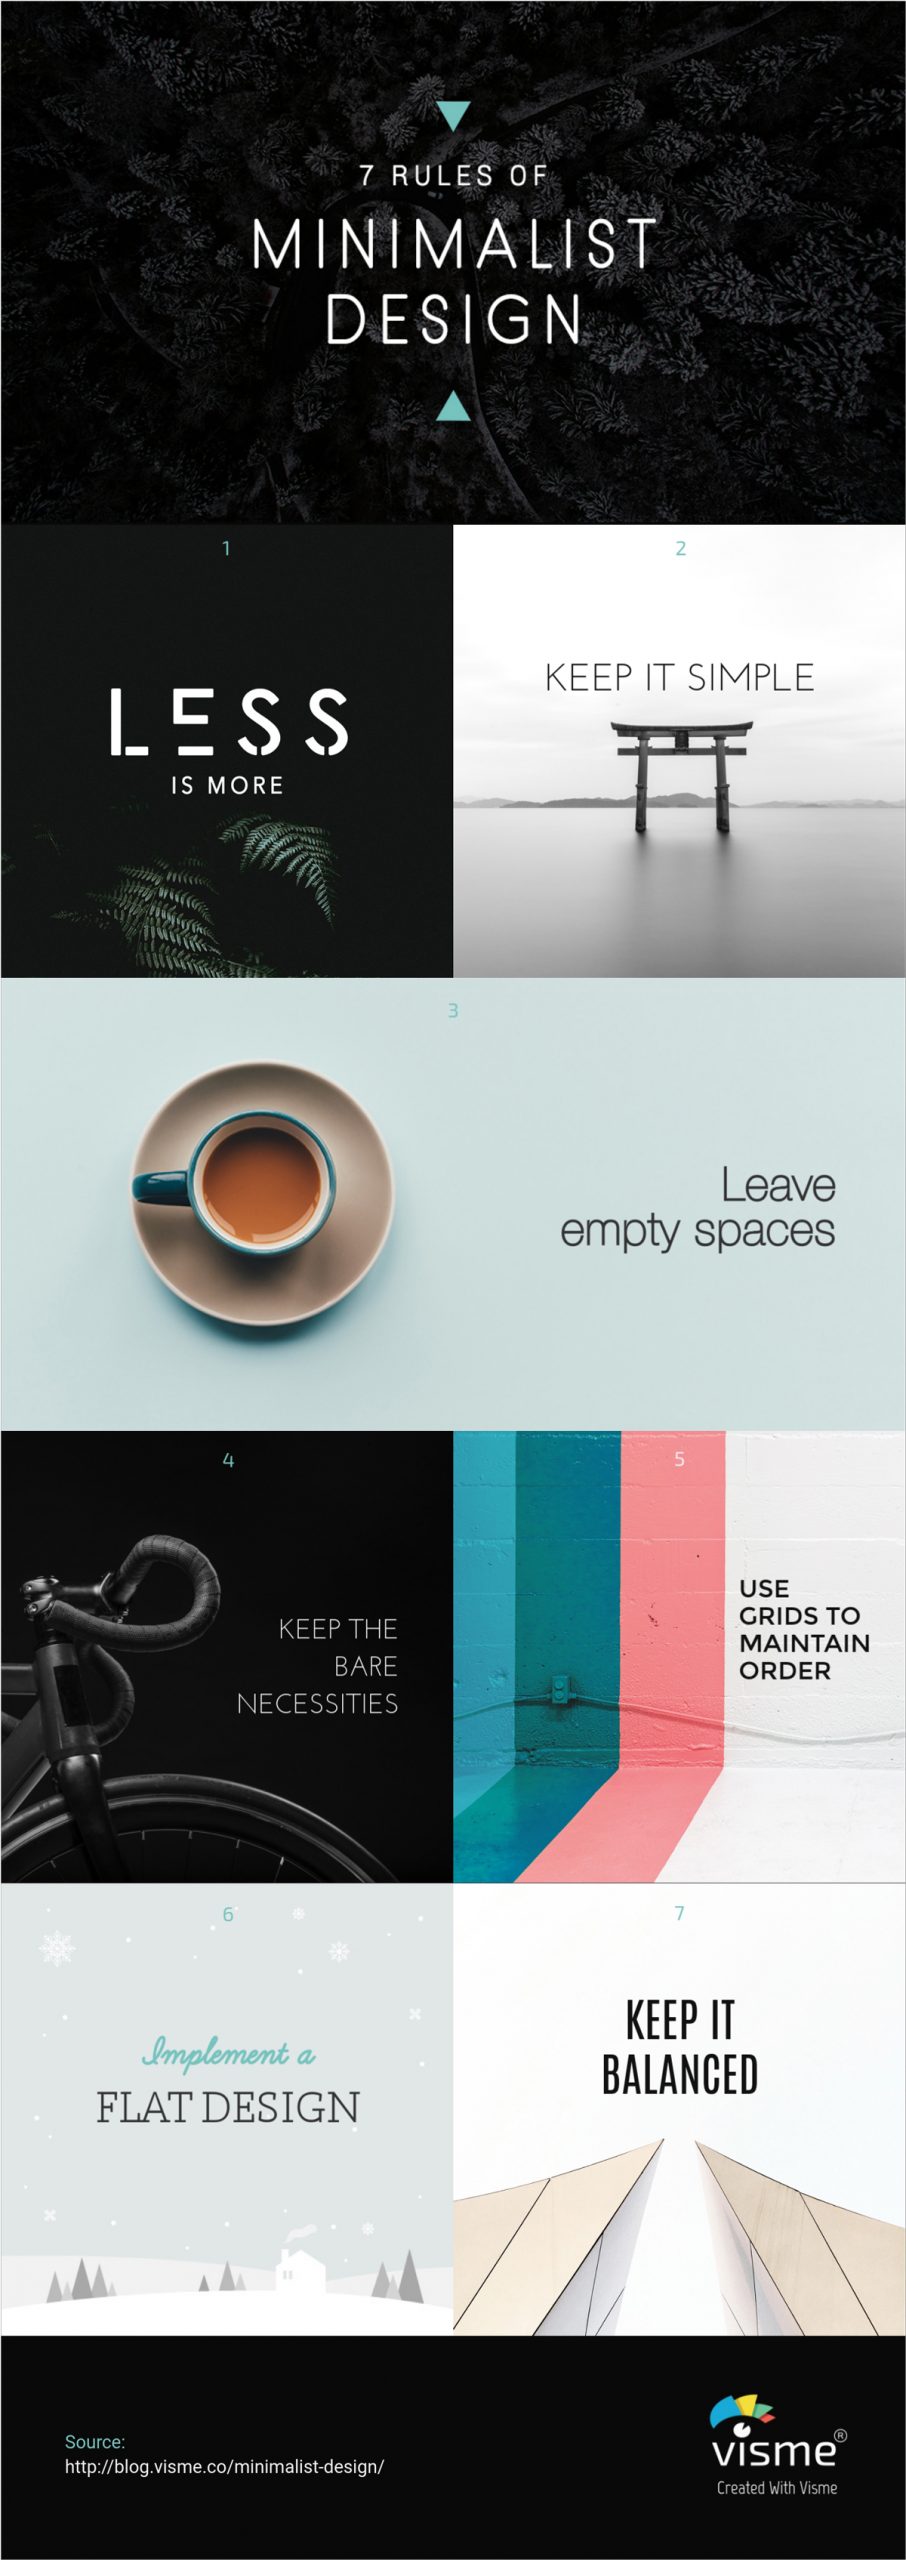 Why minimalism design is not easy